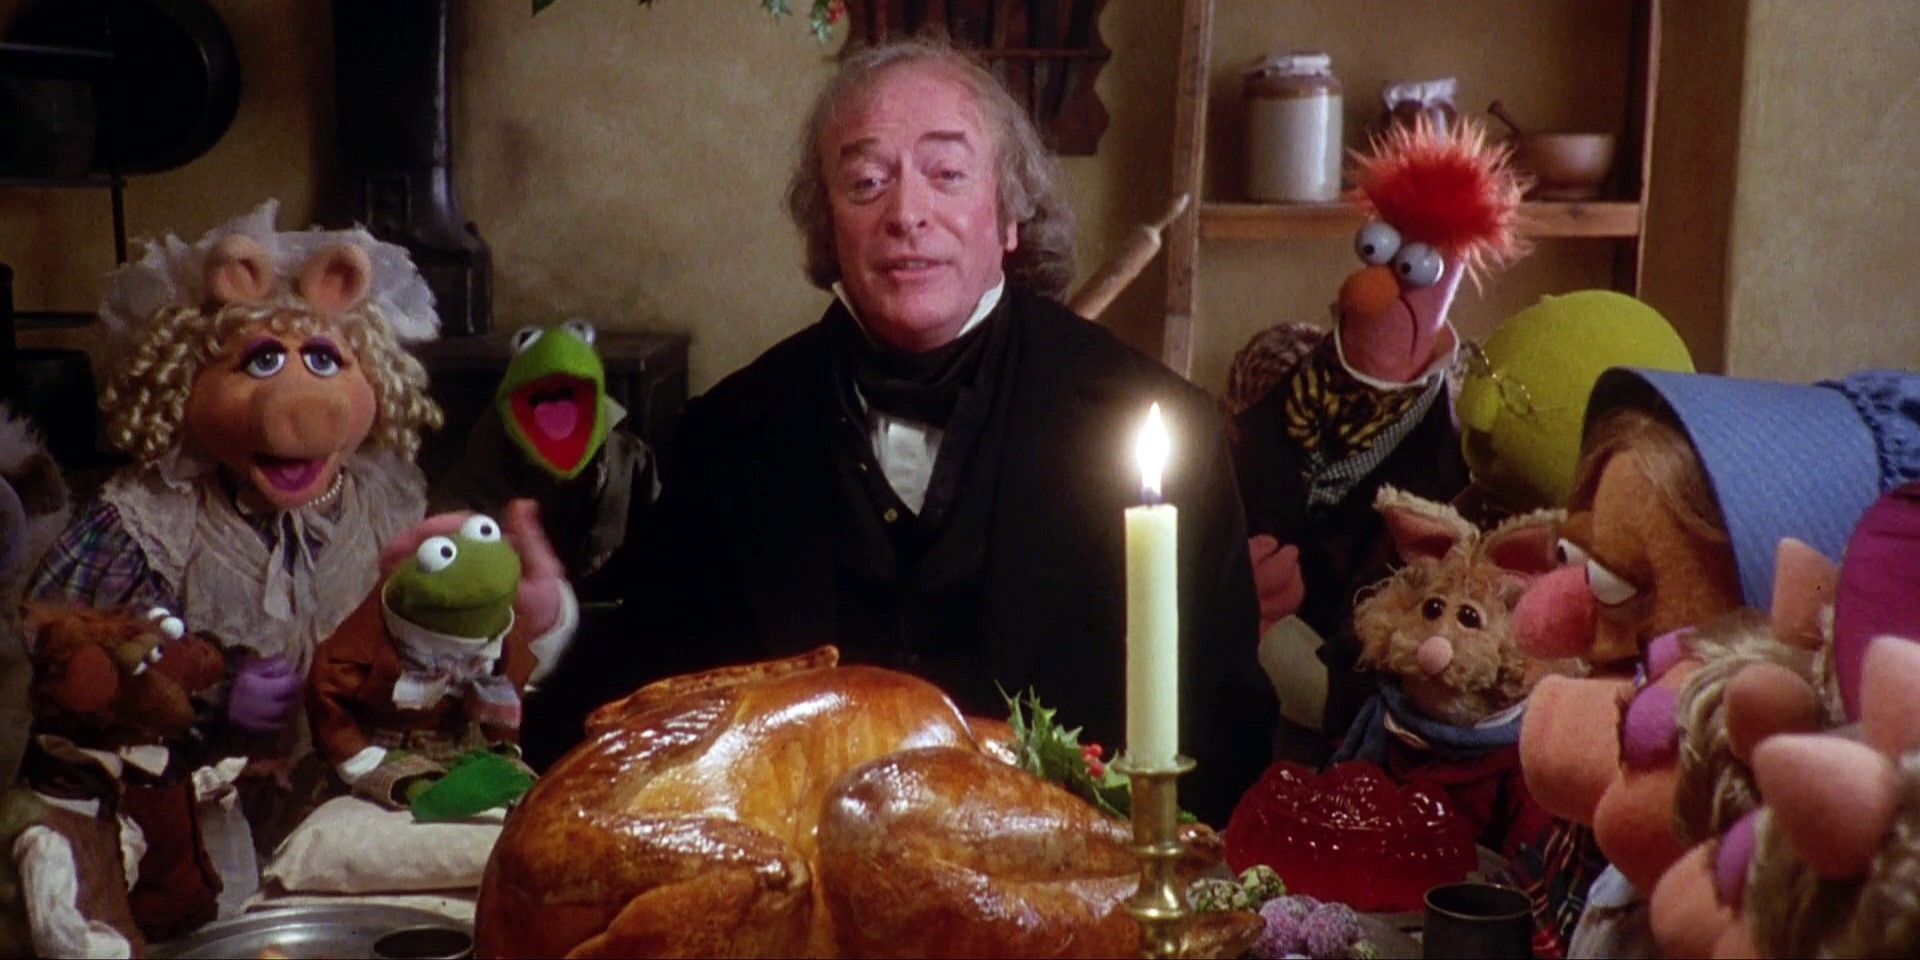 Ebeneezer Scrooge (Michael Caine) and the Muppets gathered around a Christmas turkey dinner in A Muppet Christmas Carol